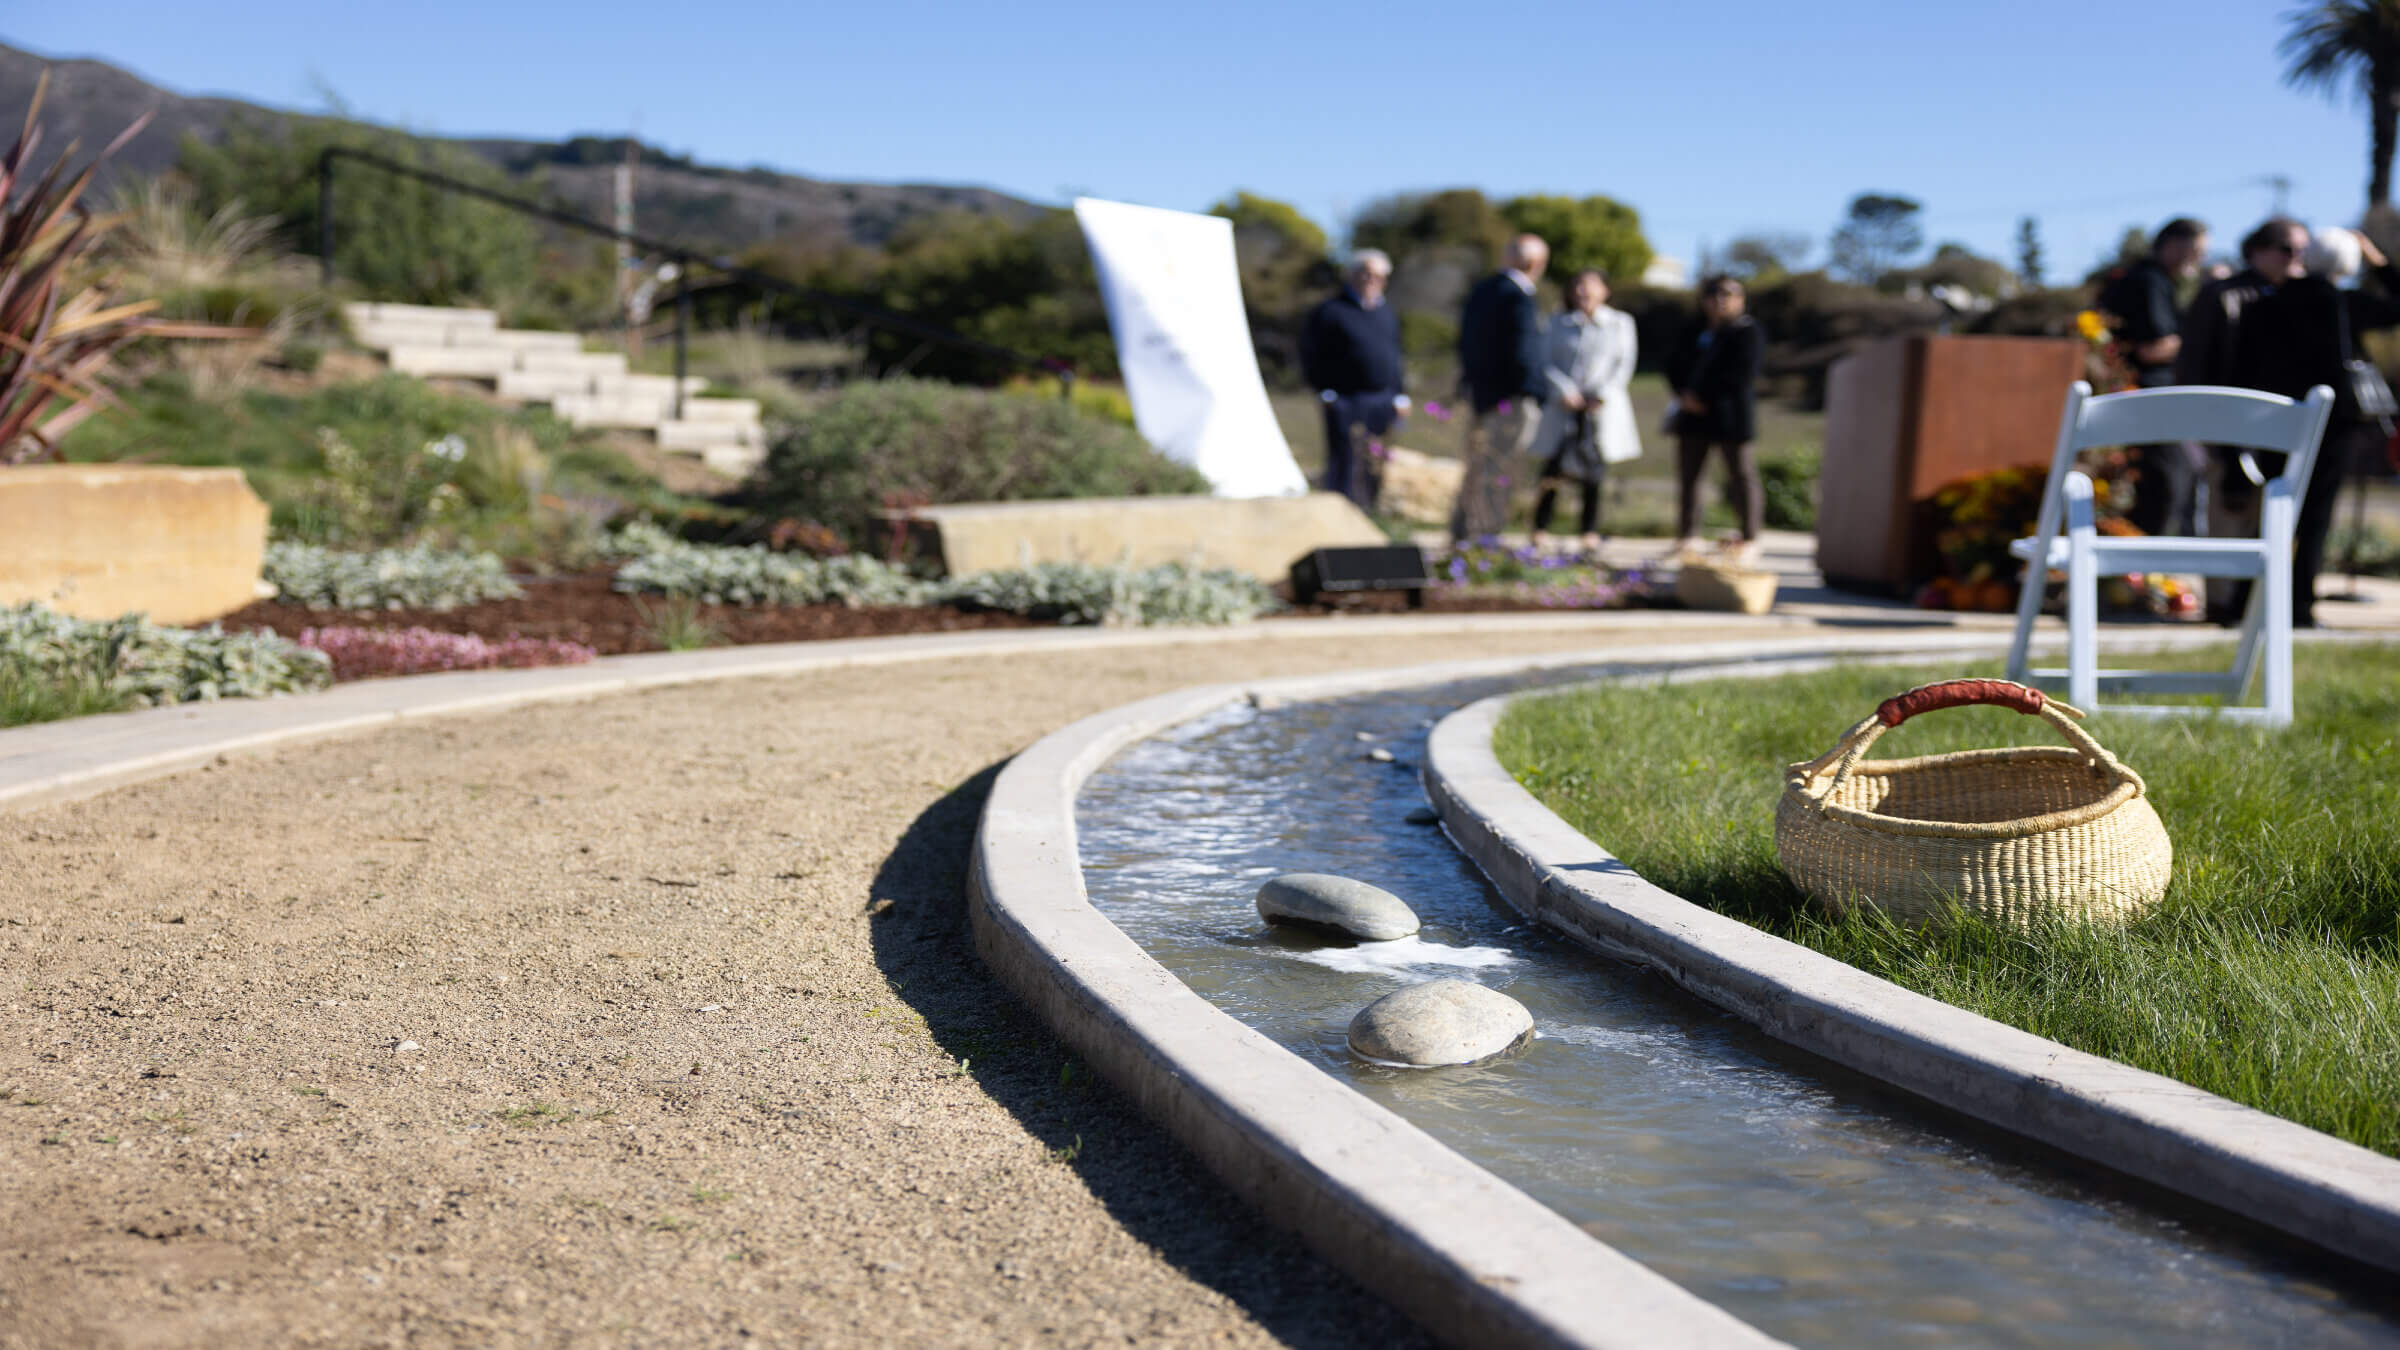 The water element in the Memory Garden at Jewish Eternal Home Cemetery in Colma, California. 